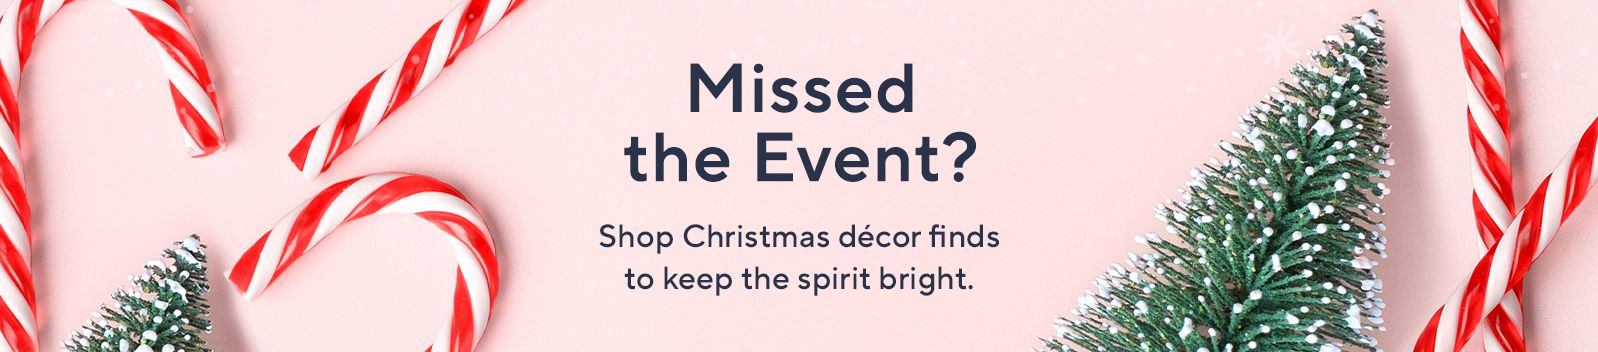 Missed the Event? Shop Christmas décor finds to keep the spirit bright.